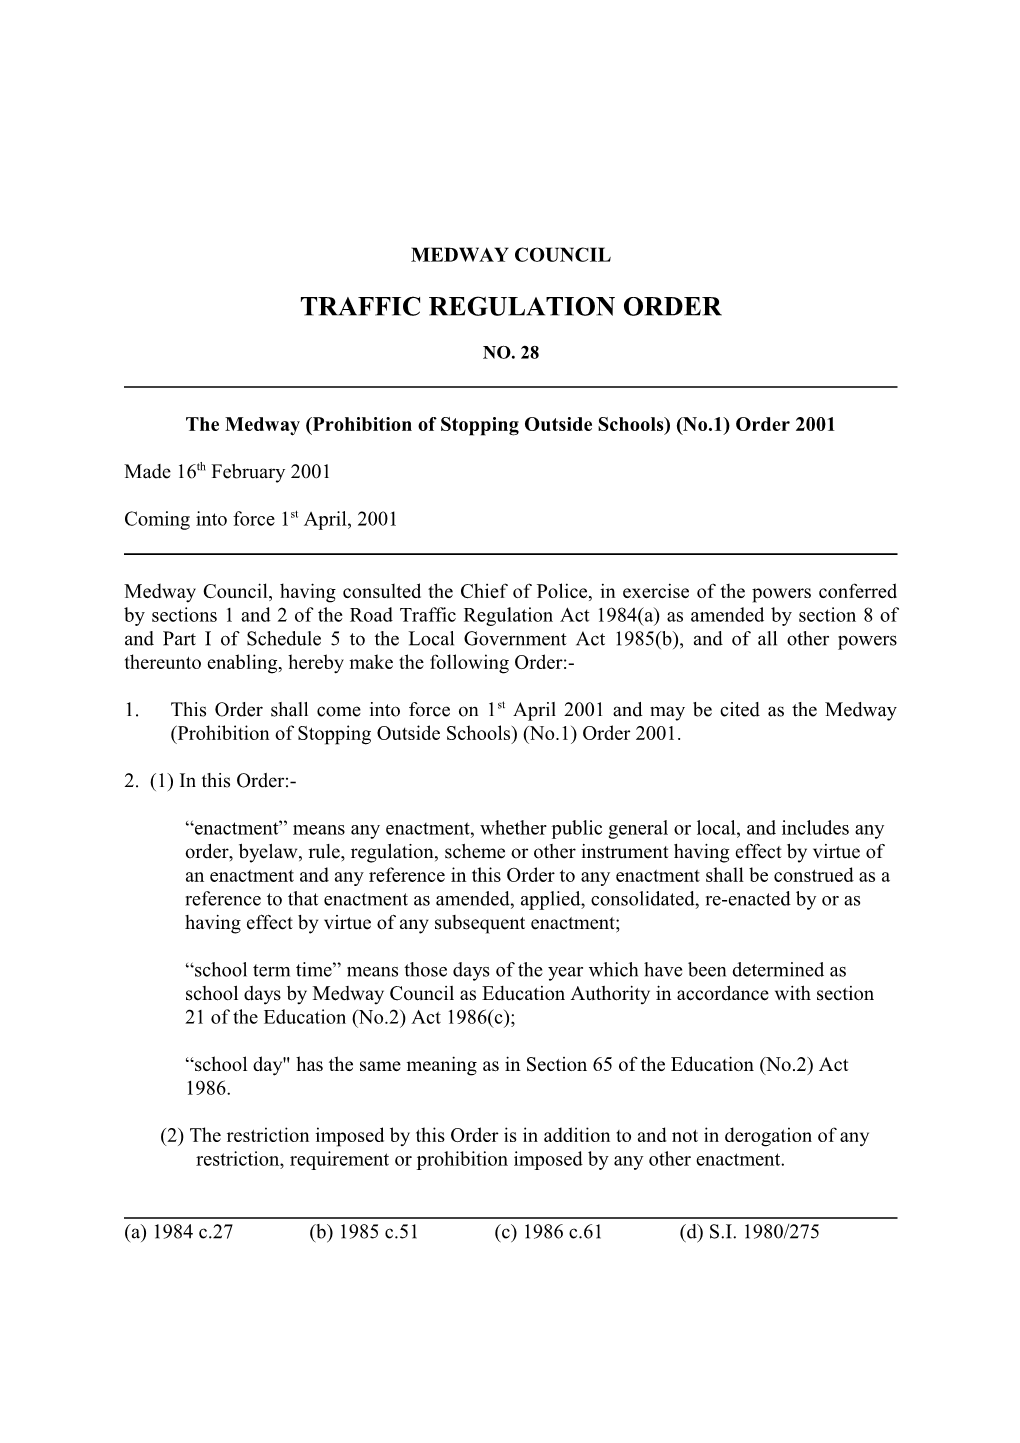 The Medway (Prohibition of Stopping Outside Schools) (No.1) Order 2001